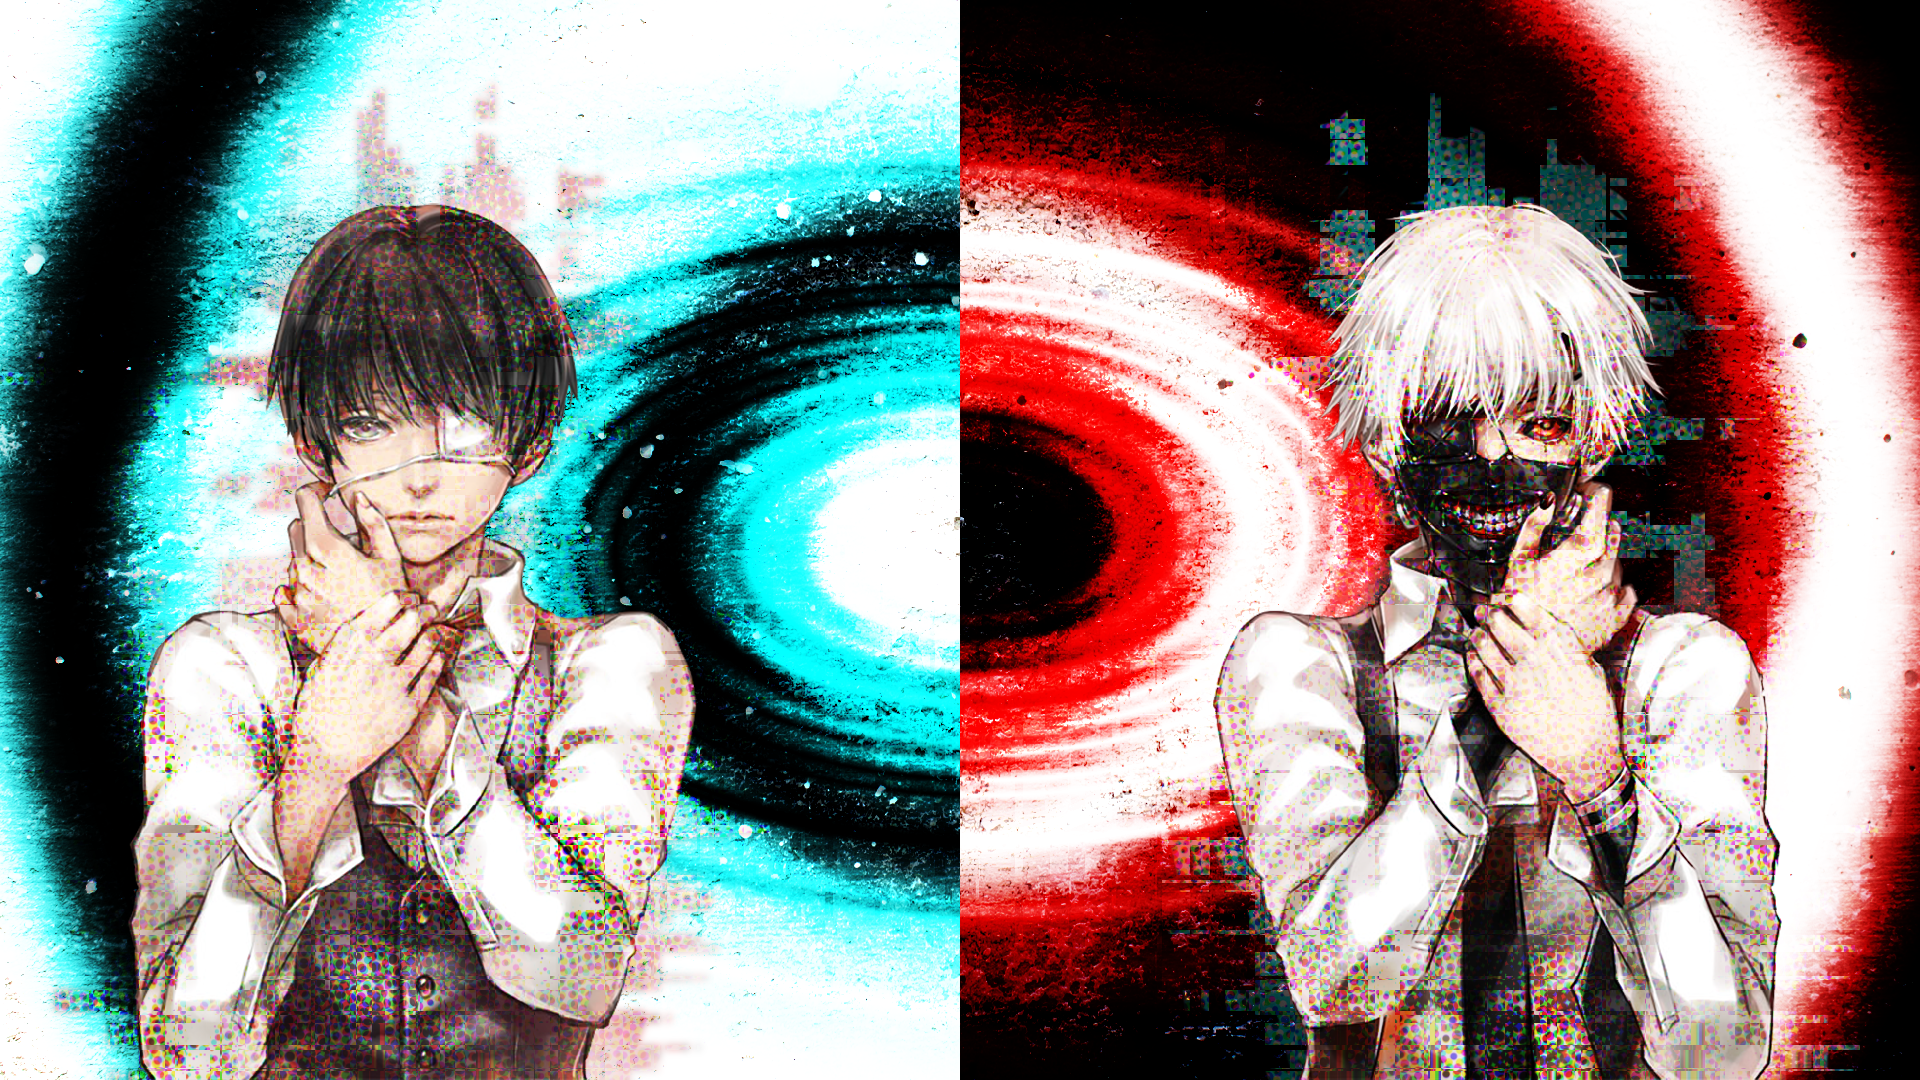 Tokyo Ghoul Theme Profile Themes   Story Quotev 1920x1080